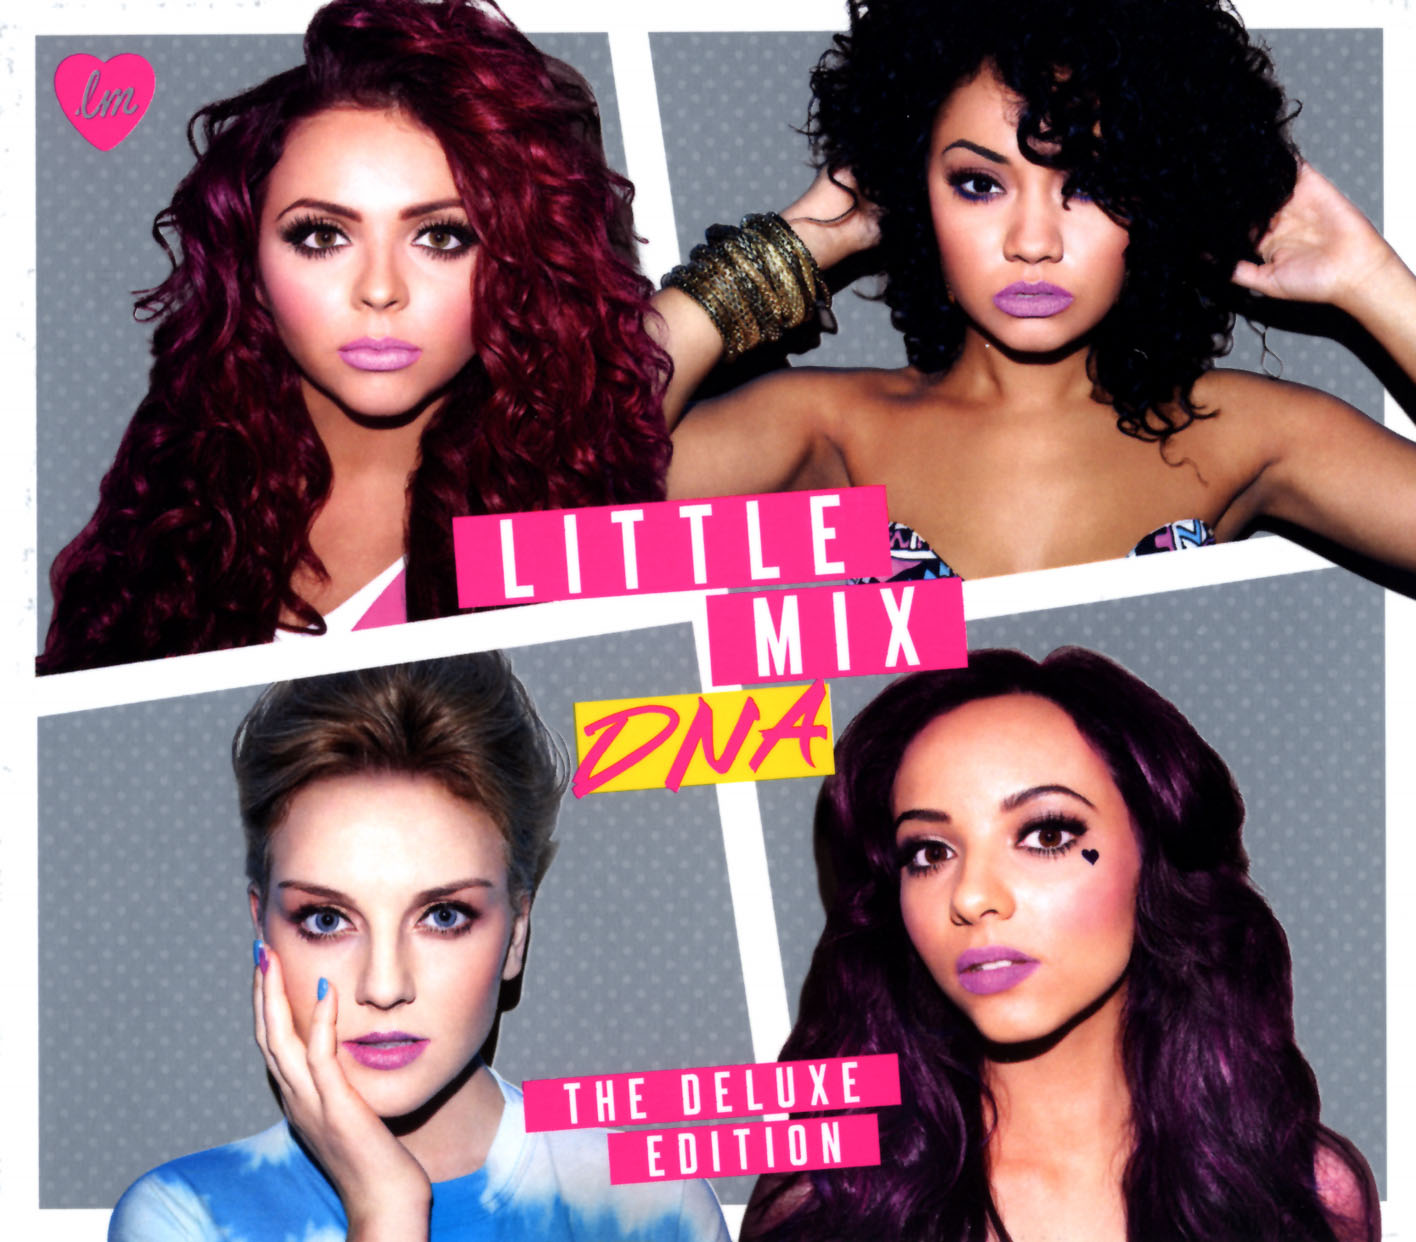 DNA: The Deluxe Edition